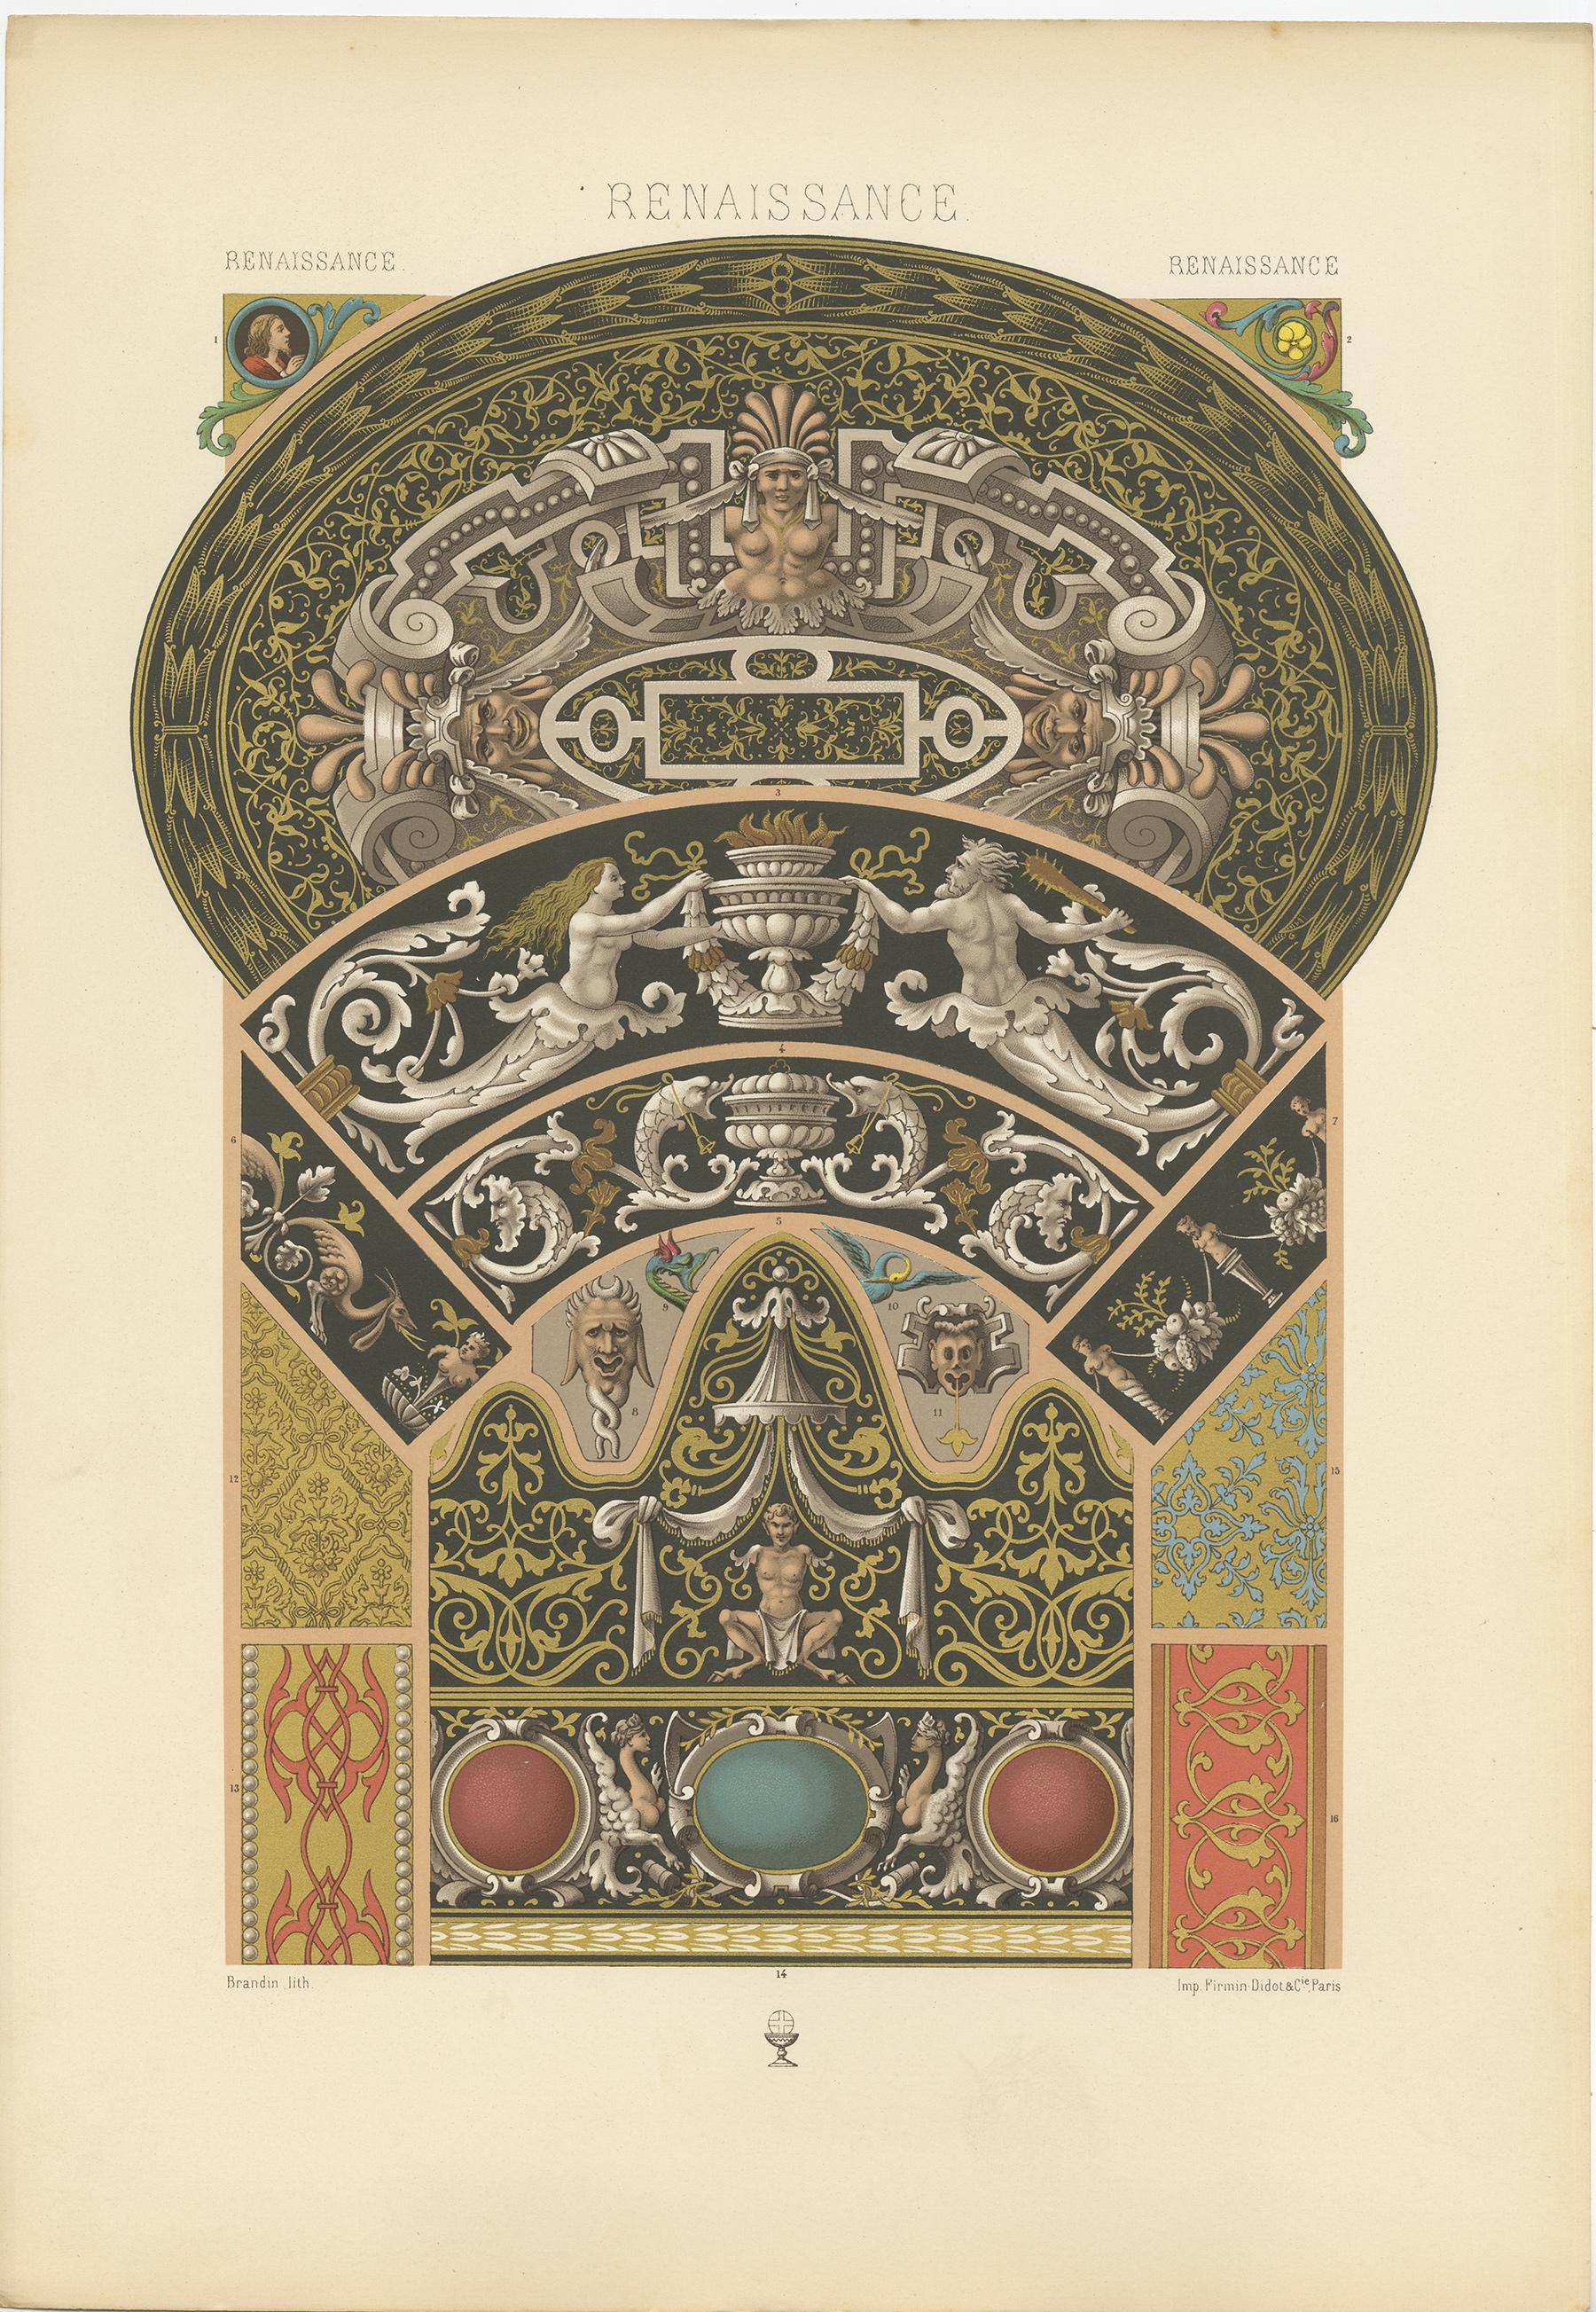 Antique print titled 'Renaissance - Renaissance - Renaissance'. Chromolithograph of from Limoges enamels, textiles and manuscripts 15th and 16th centuries ornaments. This print originates from 'l'Ornement Polychrome' by Auguste Racinet. Published